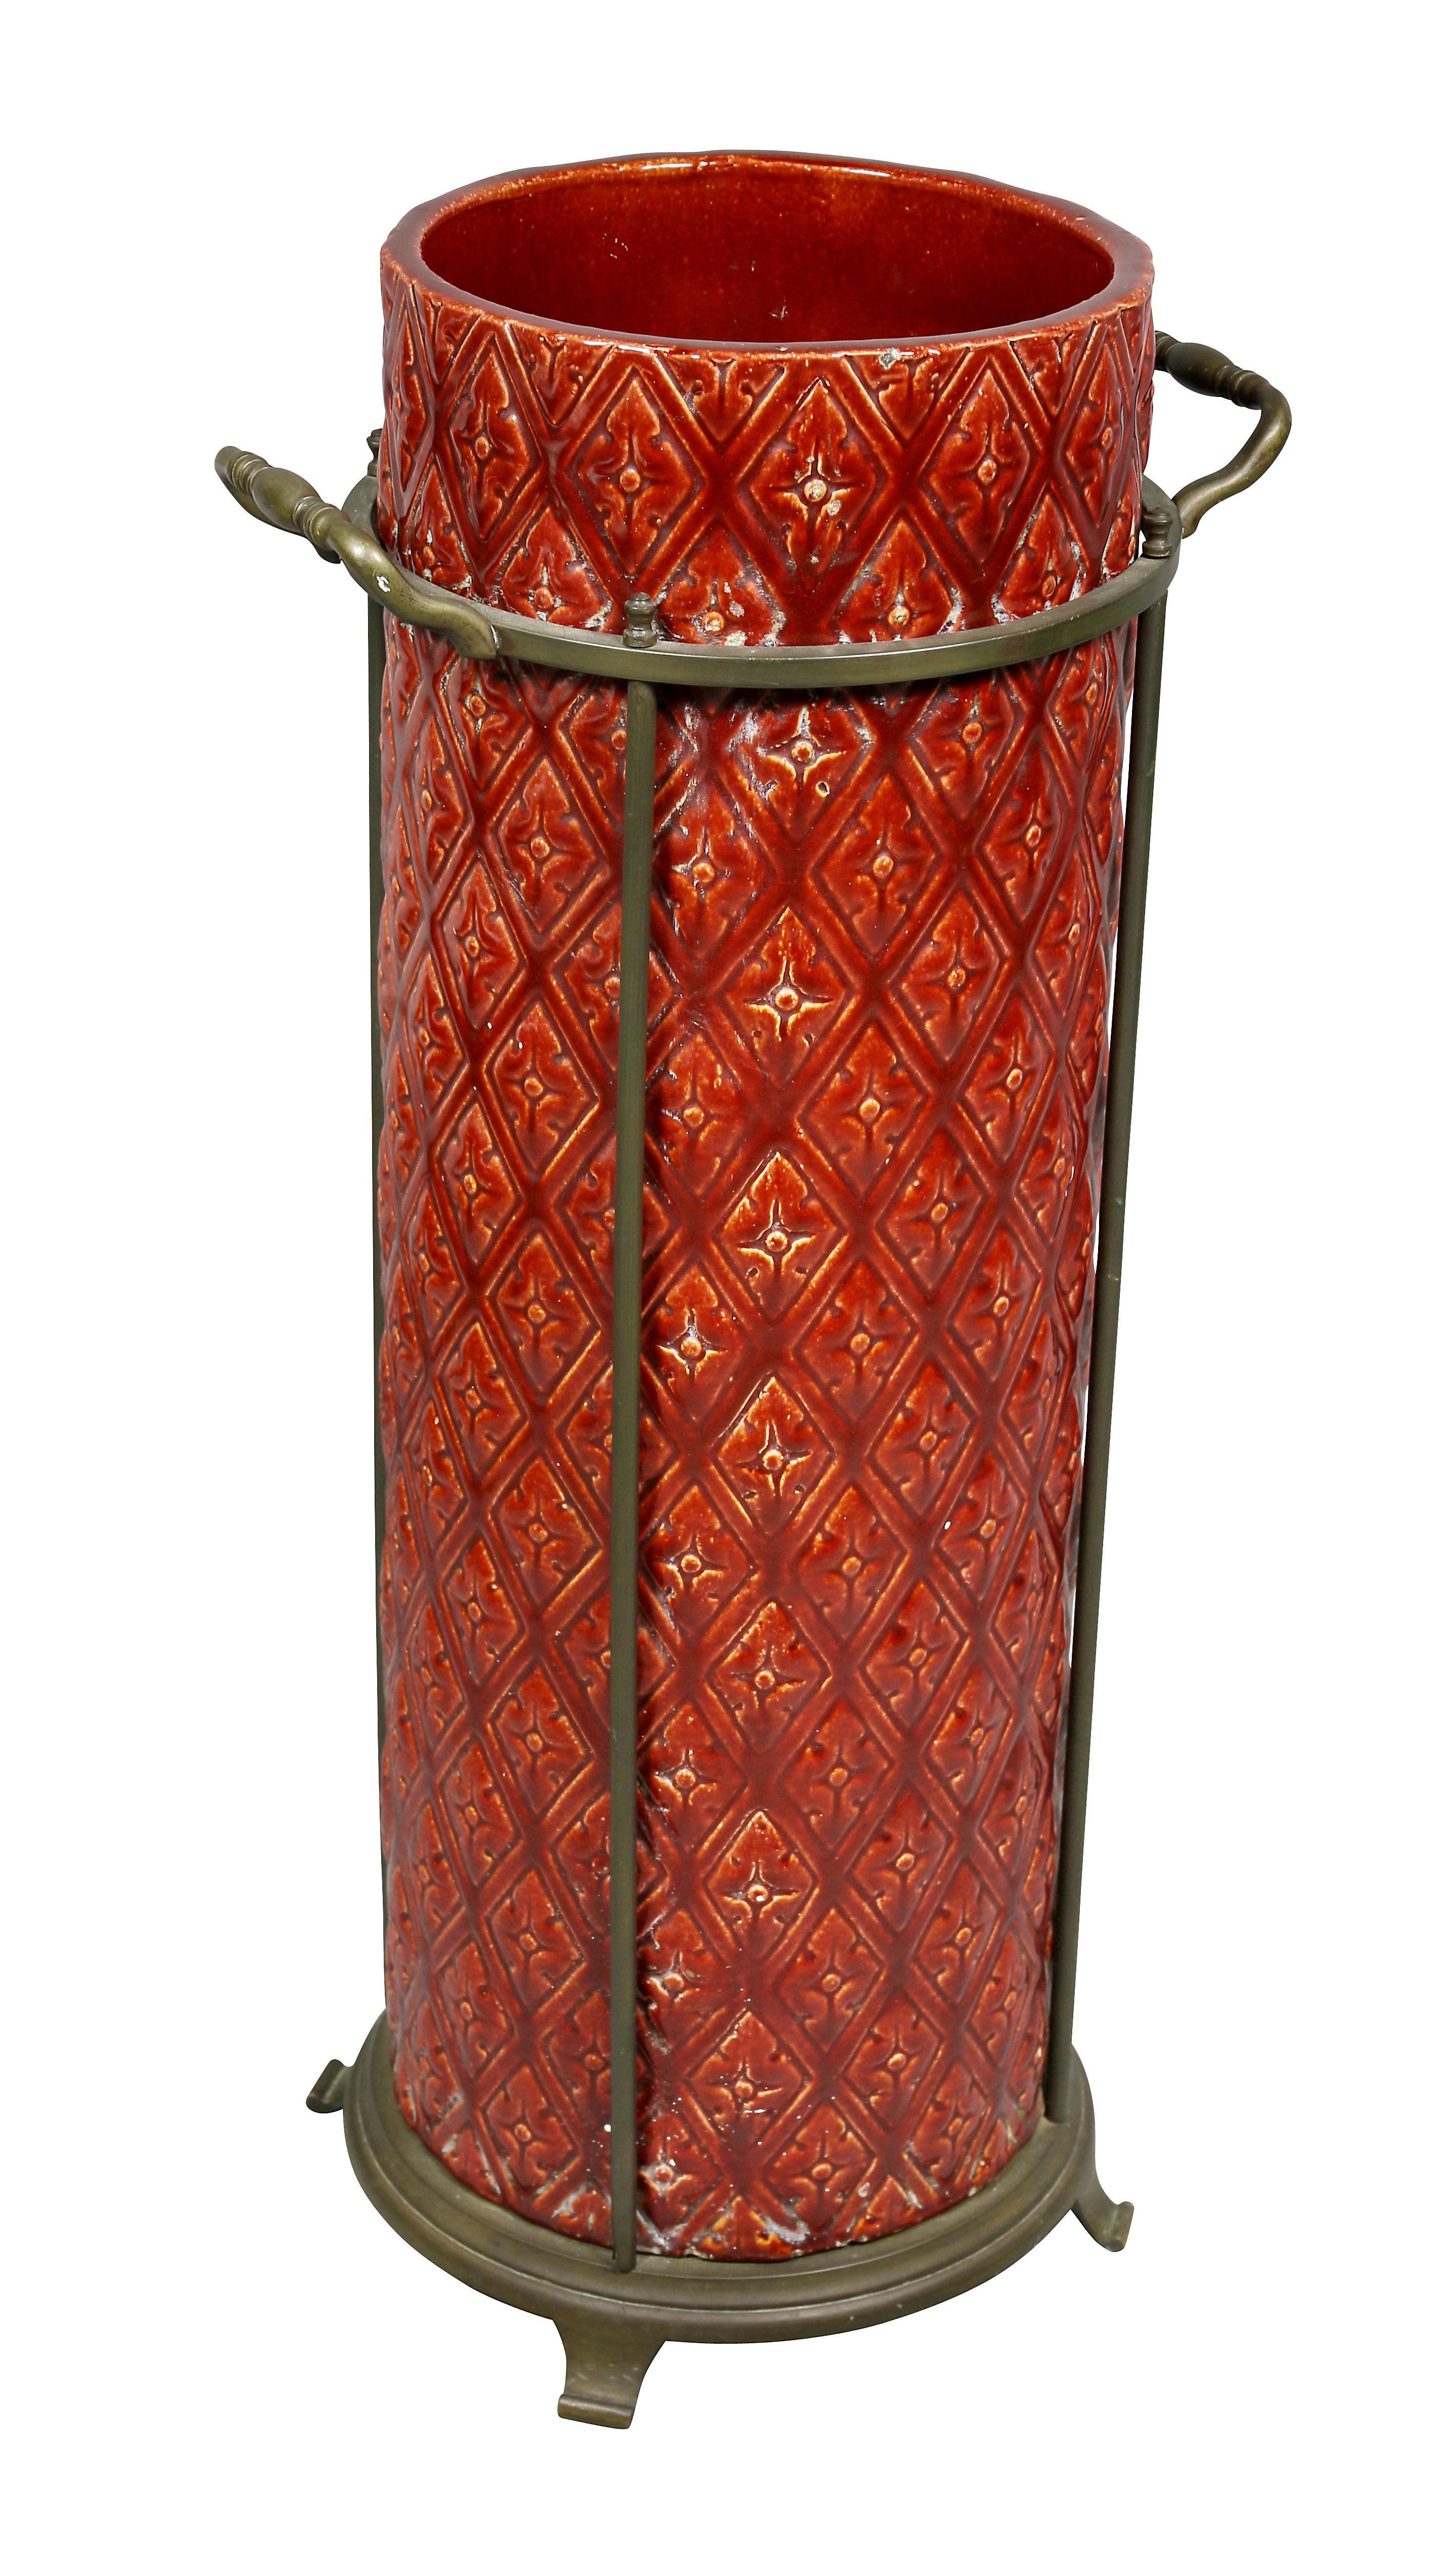 Red glaze with trellis pattern set within a brass holder with handles. Signed on base. Provenance; Dodo Dorrance Hamilton.